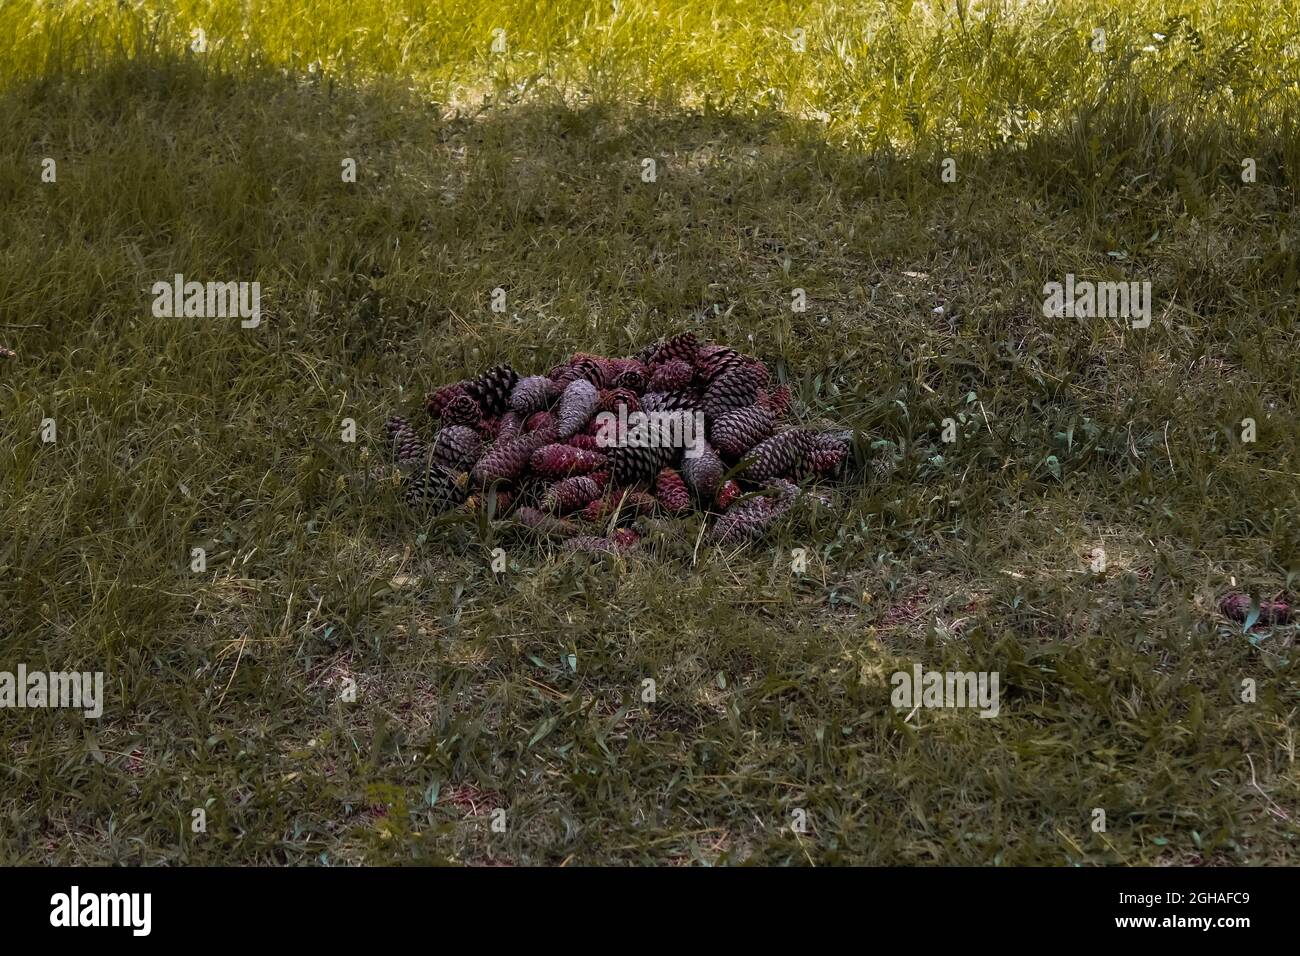 Pine cones gathered together to start a shamanic ritual at the forest. Fine cone pile. Stock Photo